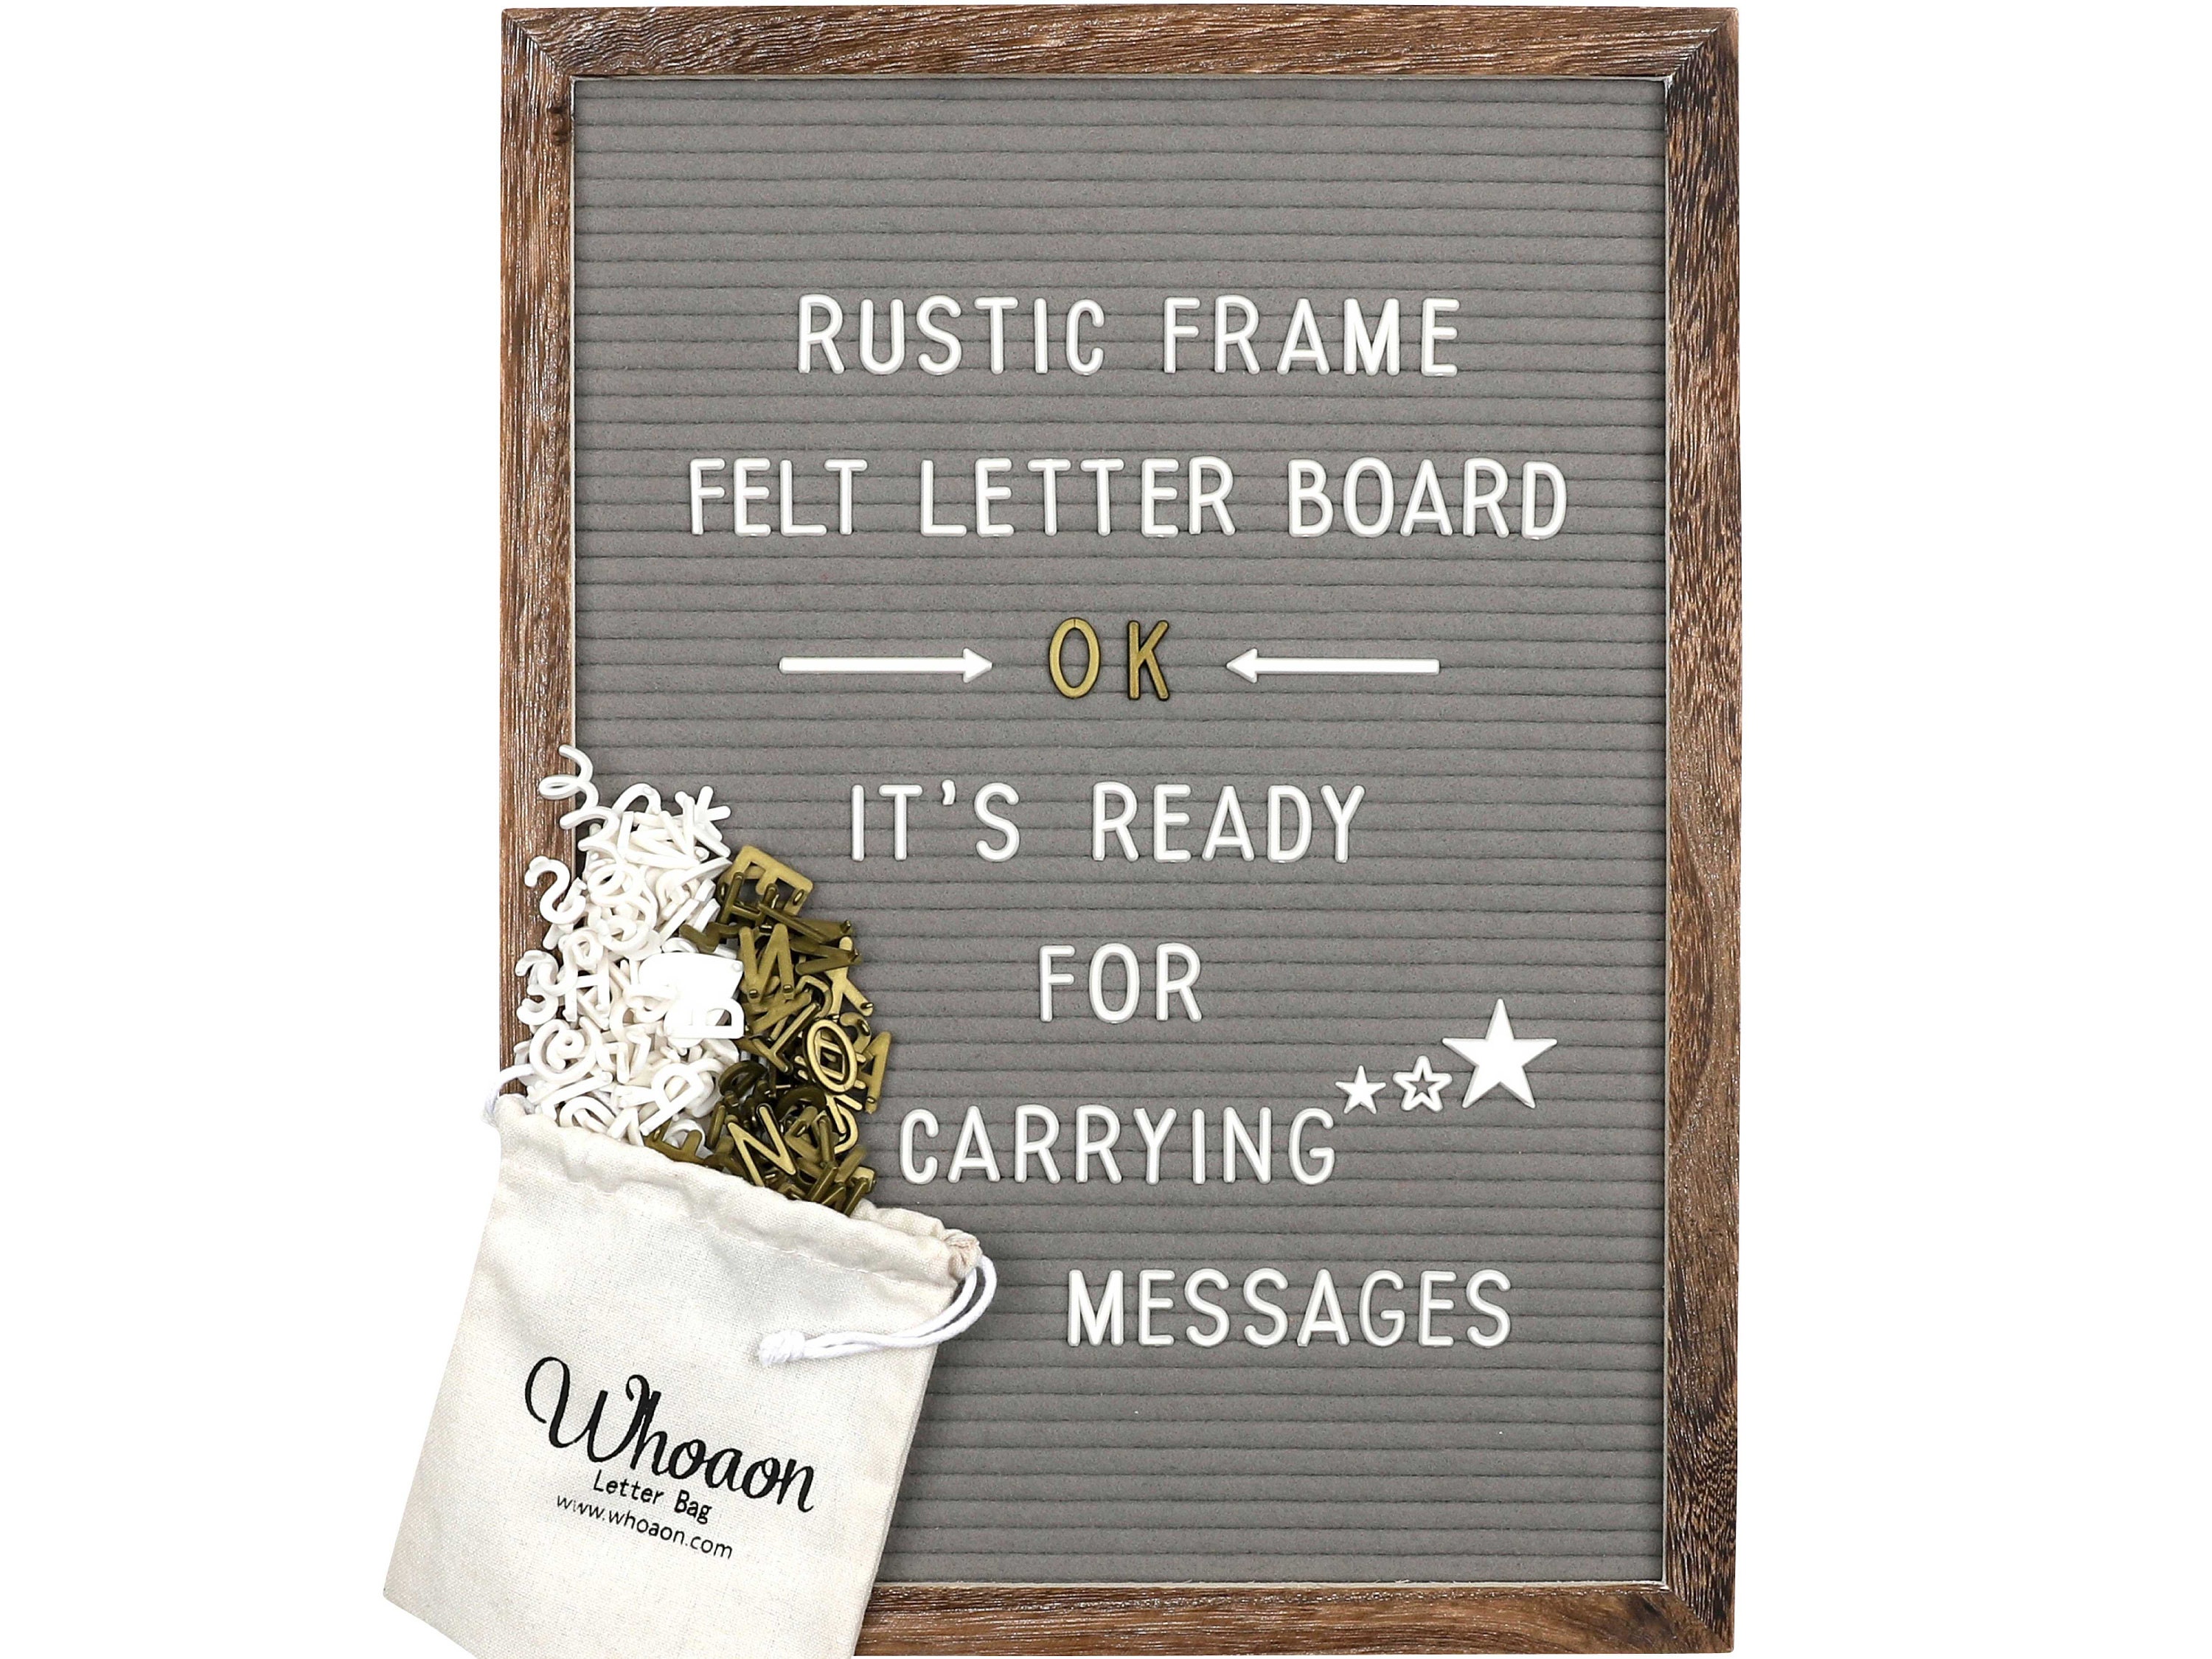 Felt Letter Board 12x16 Changeable Message Board with 170 White Letters and Symbols Winter Bulletin Board Decorations Let it Snow Christmas Gifts for Women Kids Boys Girls BLUE 